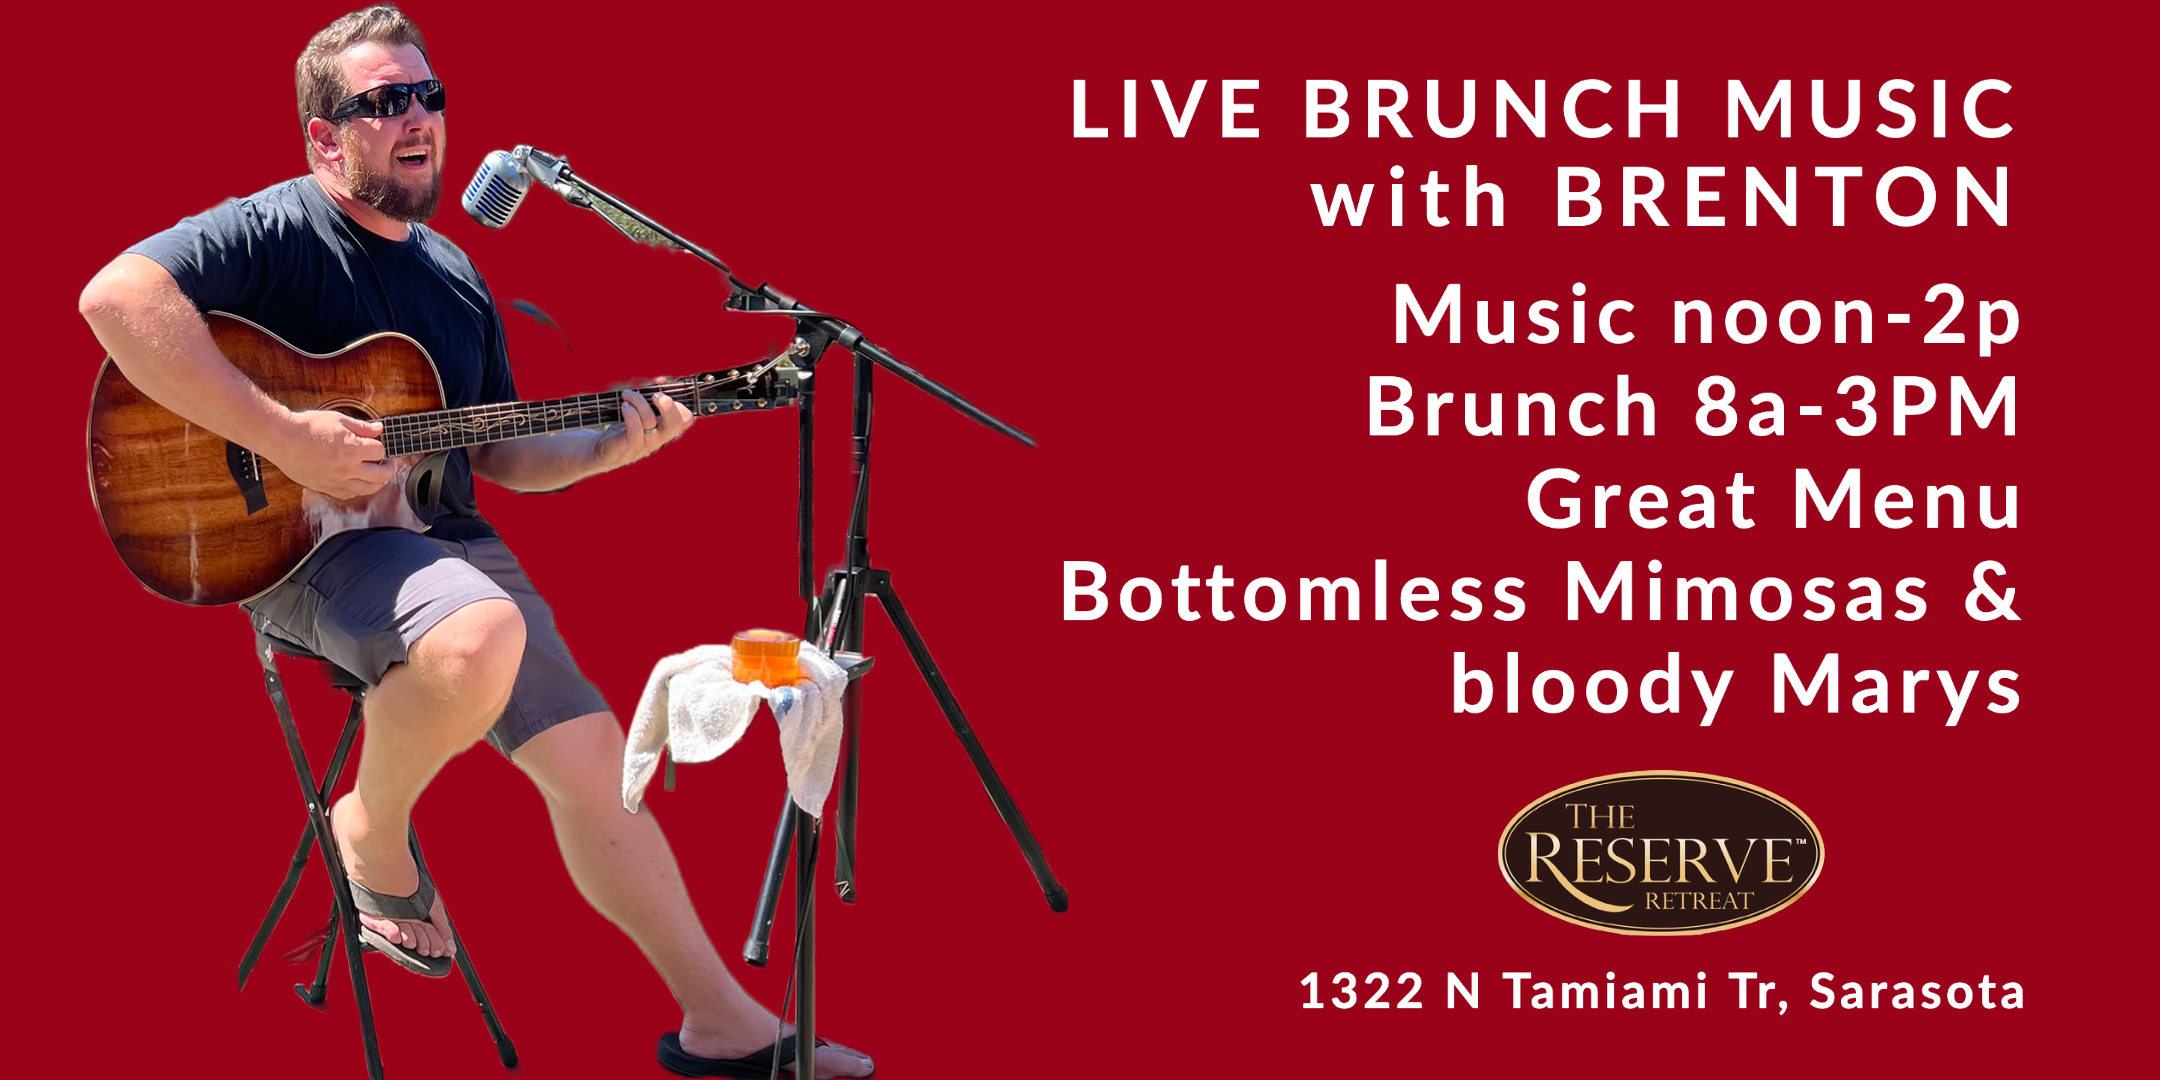 Brenton entertains during Sunday brunch from noon-2